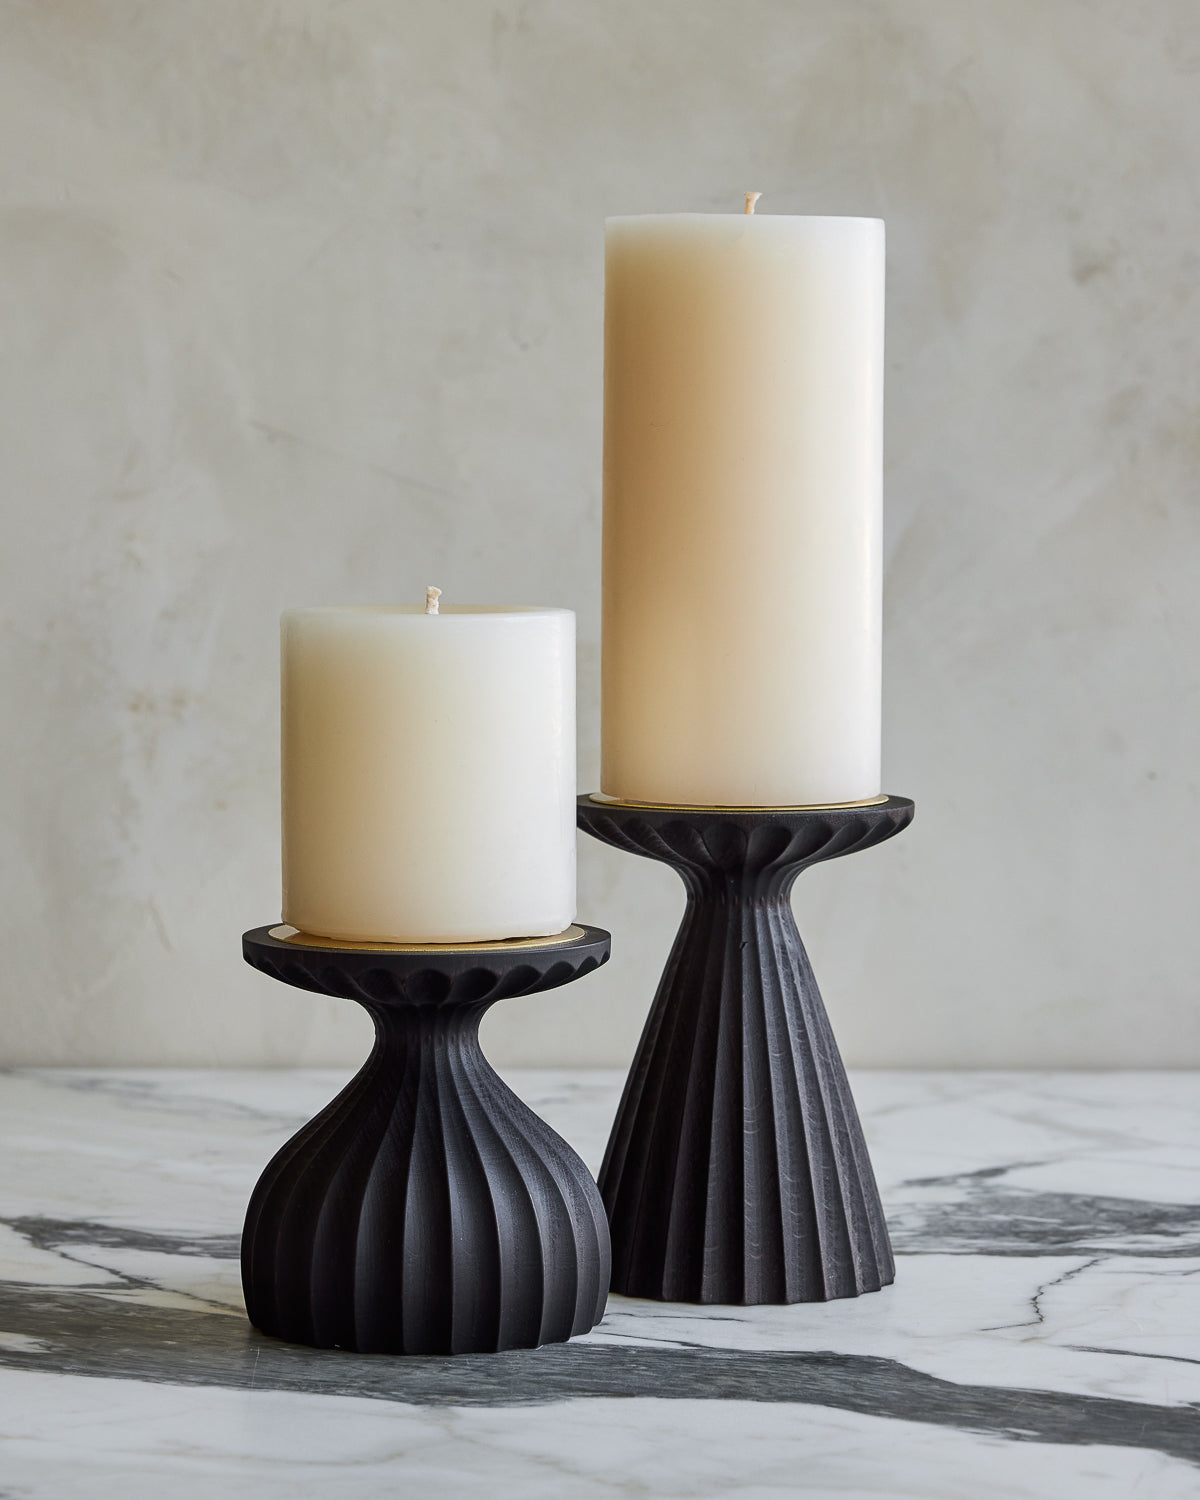 Pair of delicately grooved pillar candle holders in dark wash maple wood with shell white pillar candles